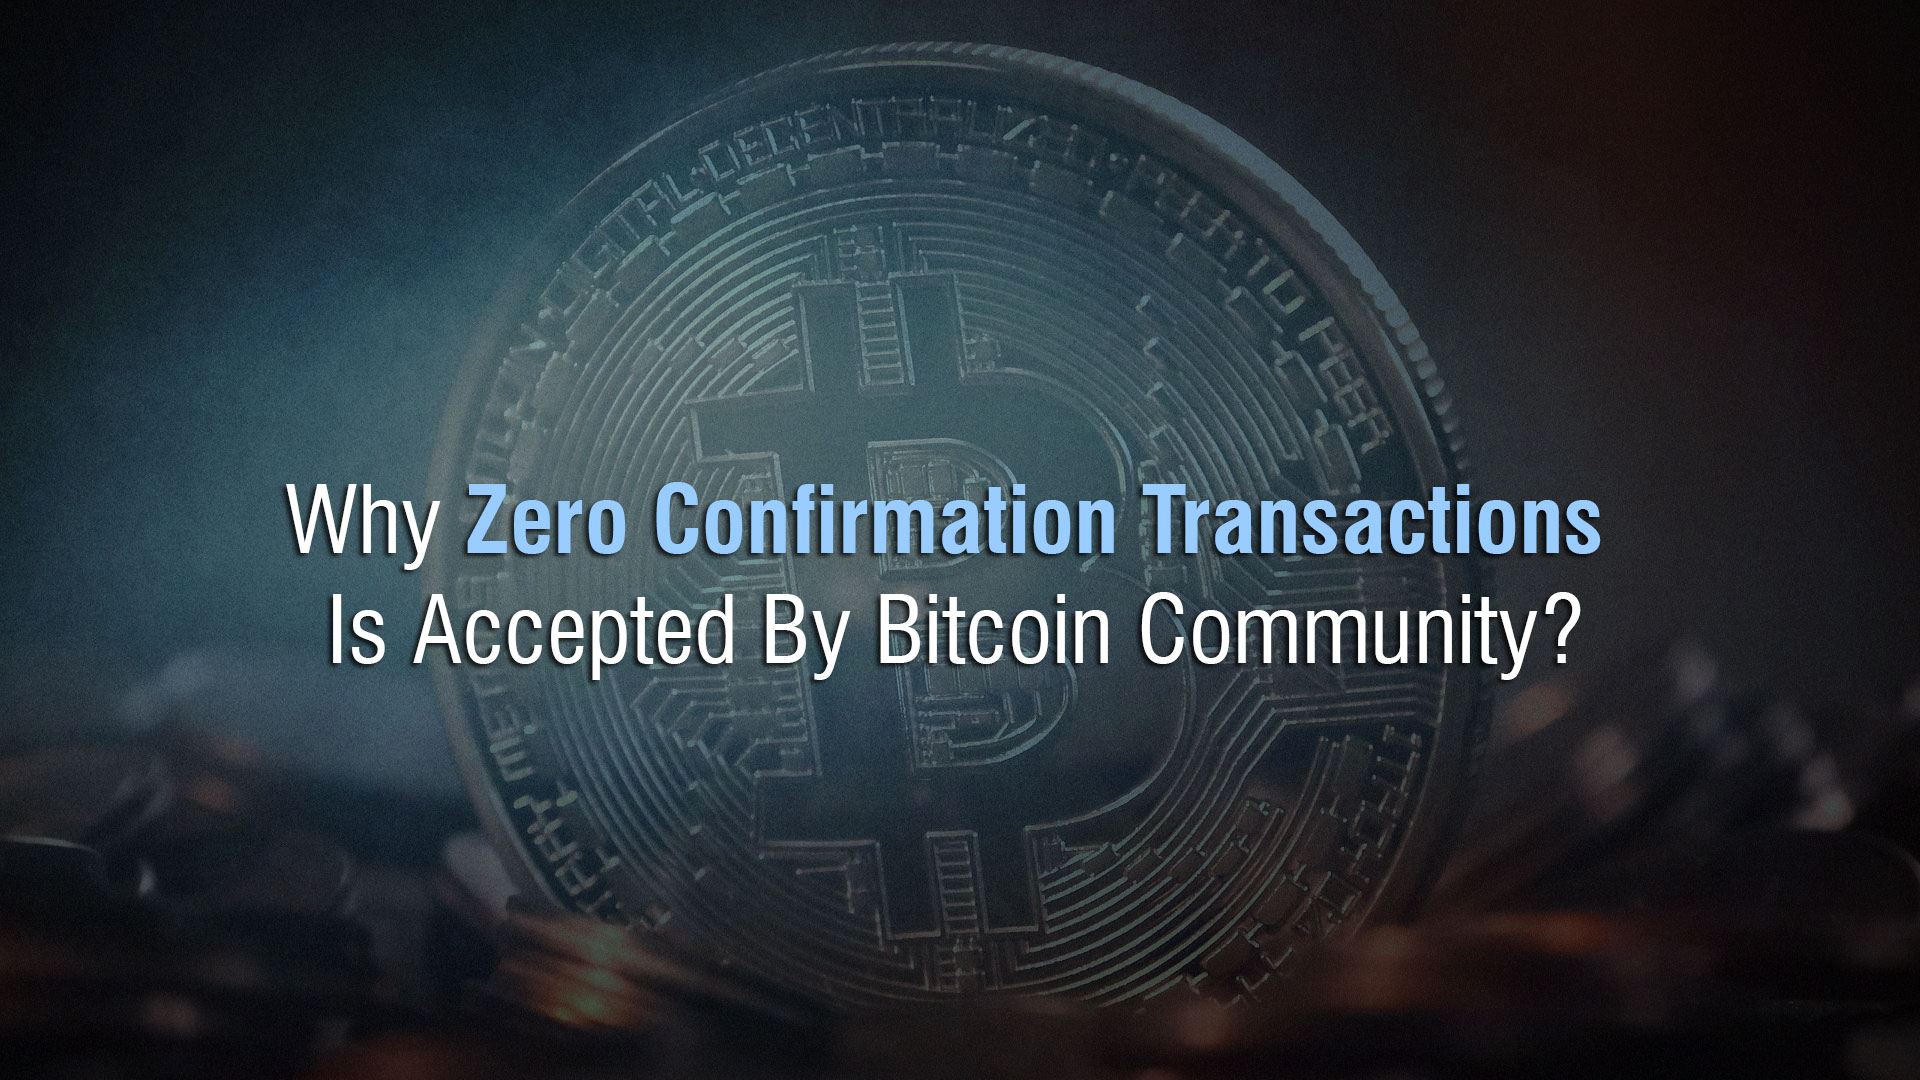 Why Zero Confirmation Transactions Is Accepted By Bitcoin Community?